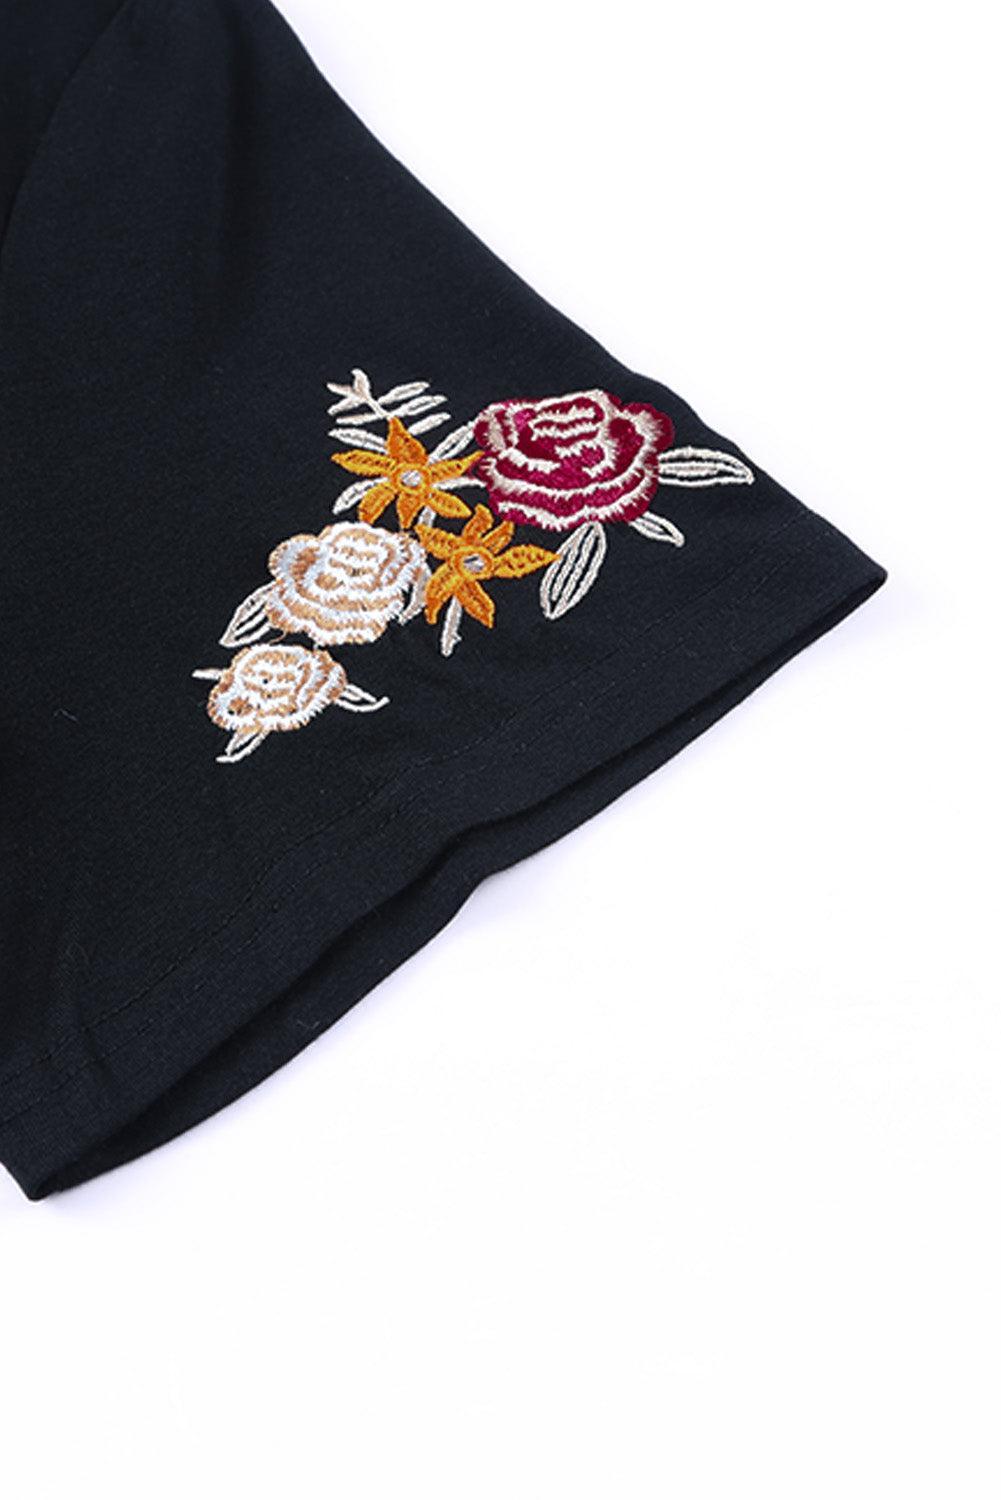 Black Casual Floral Embroidered Round Neck T Shirt - Ninonine